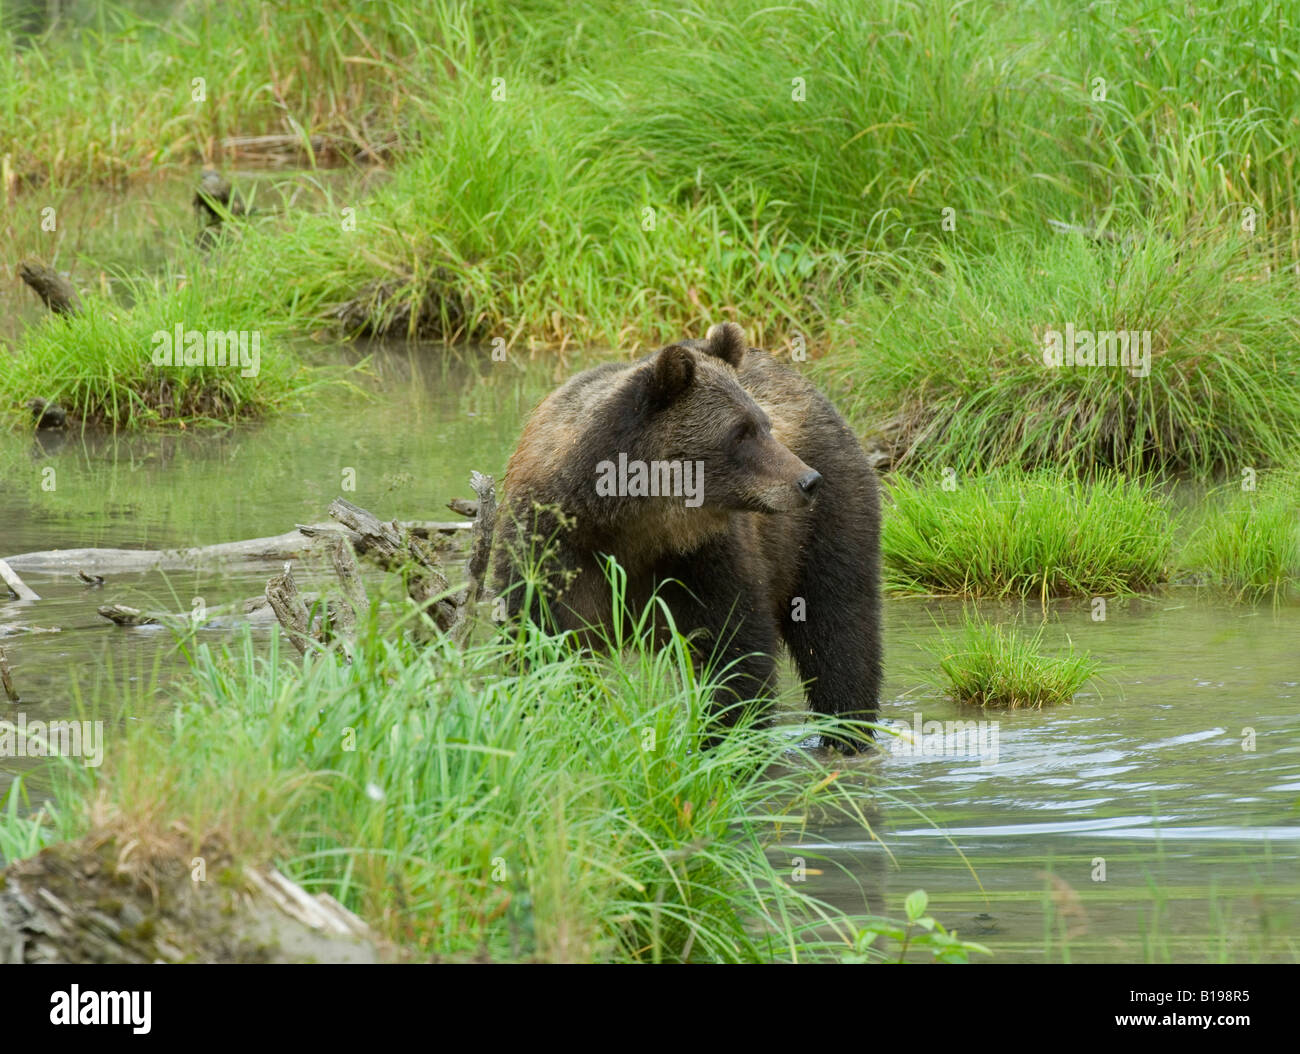 Grizzly Bear (Ursus arctos) Adult. Although classed as carnivores bears tend to be omnivorous and are always foraging for someth Stock Photo